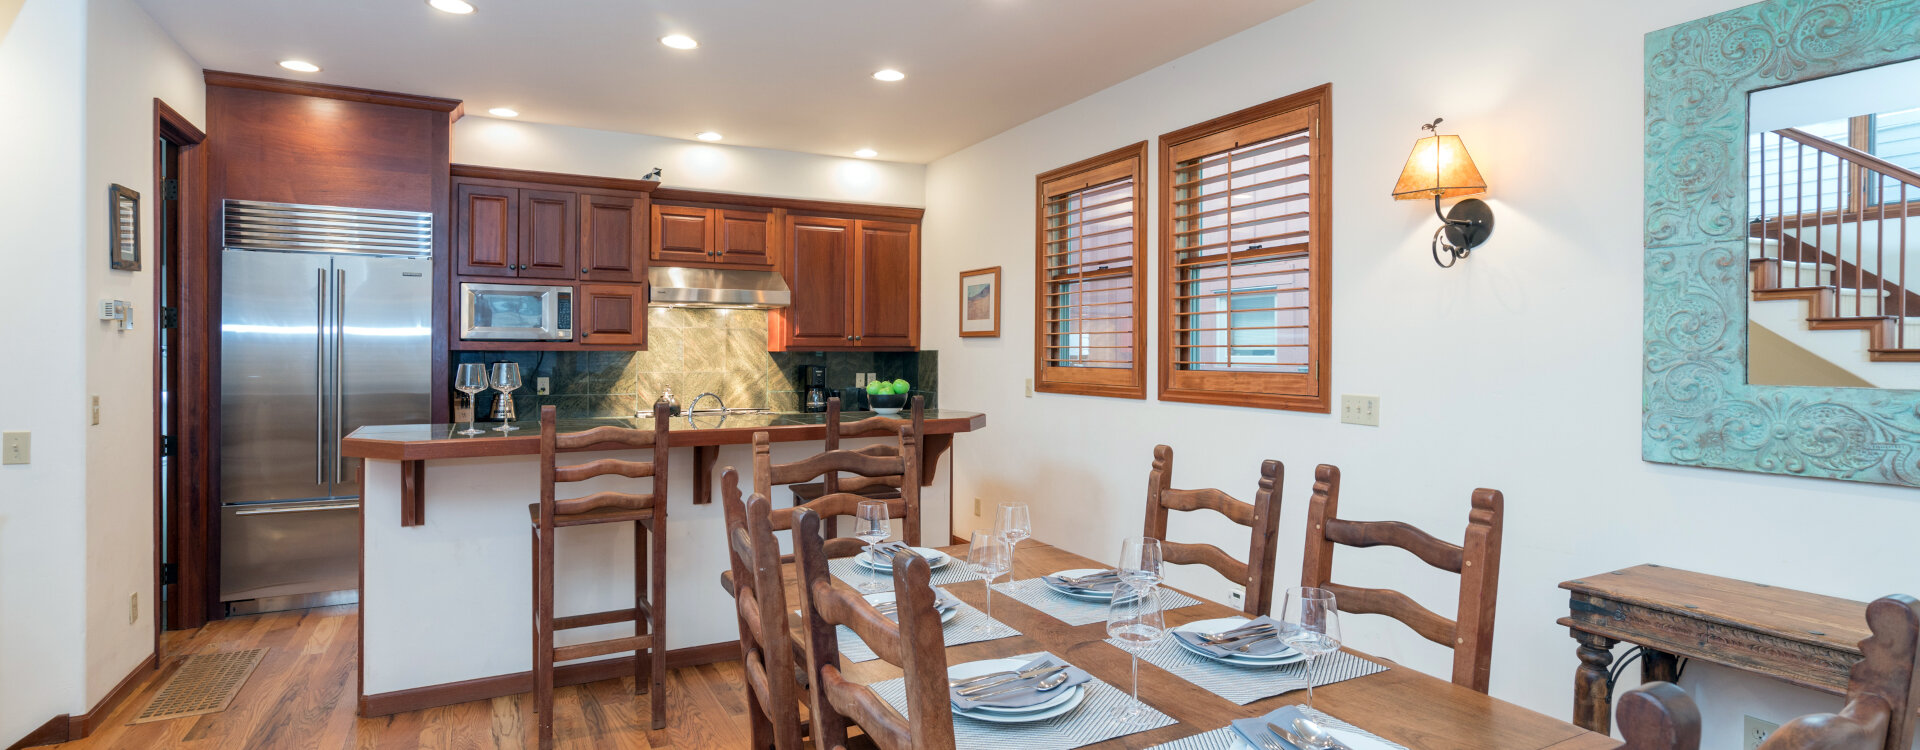 2.04-telluride-south-pacific-new-dining-kitchen-web